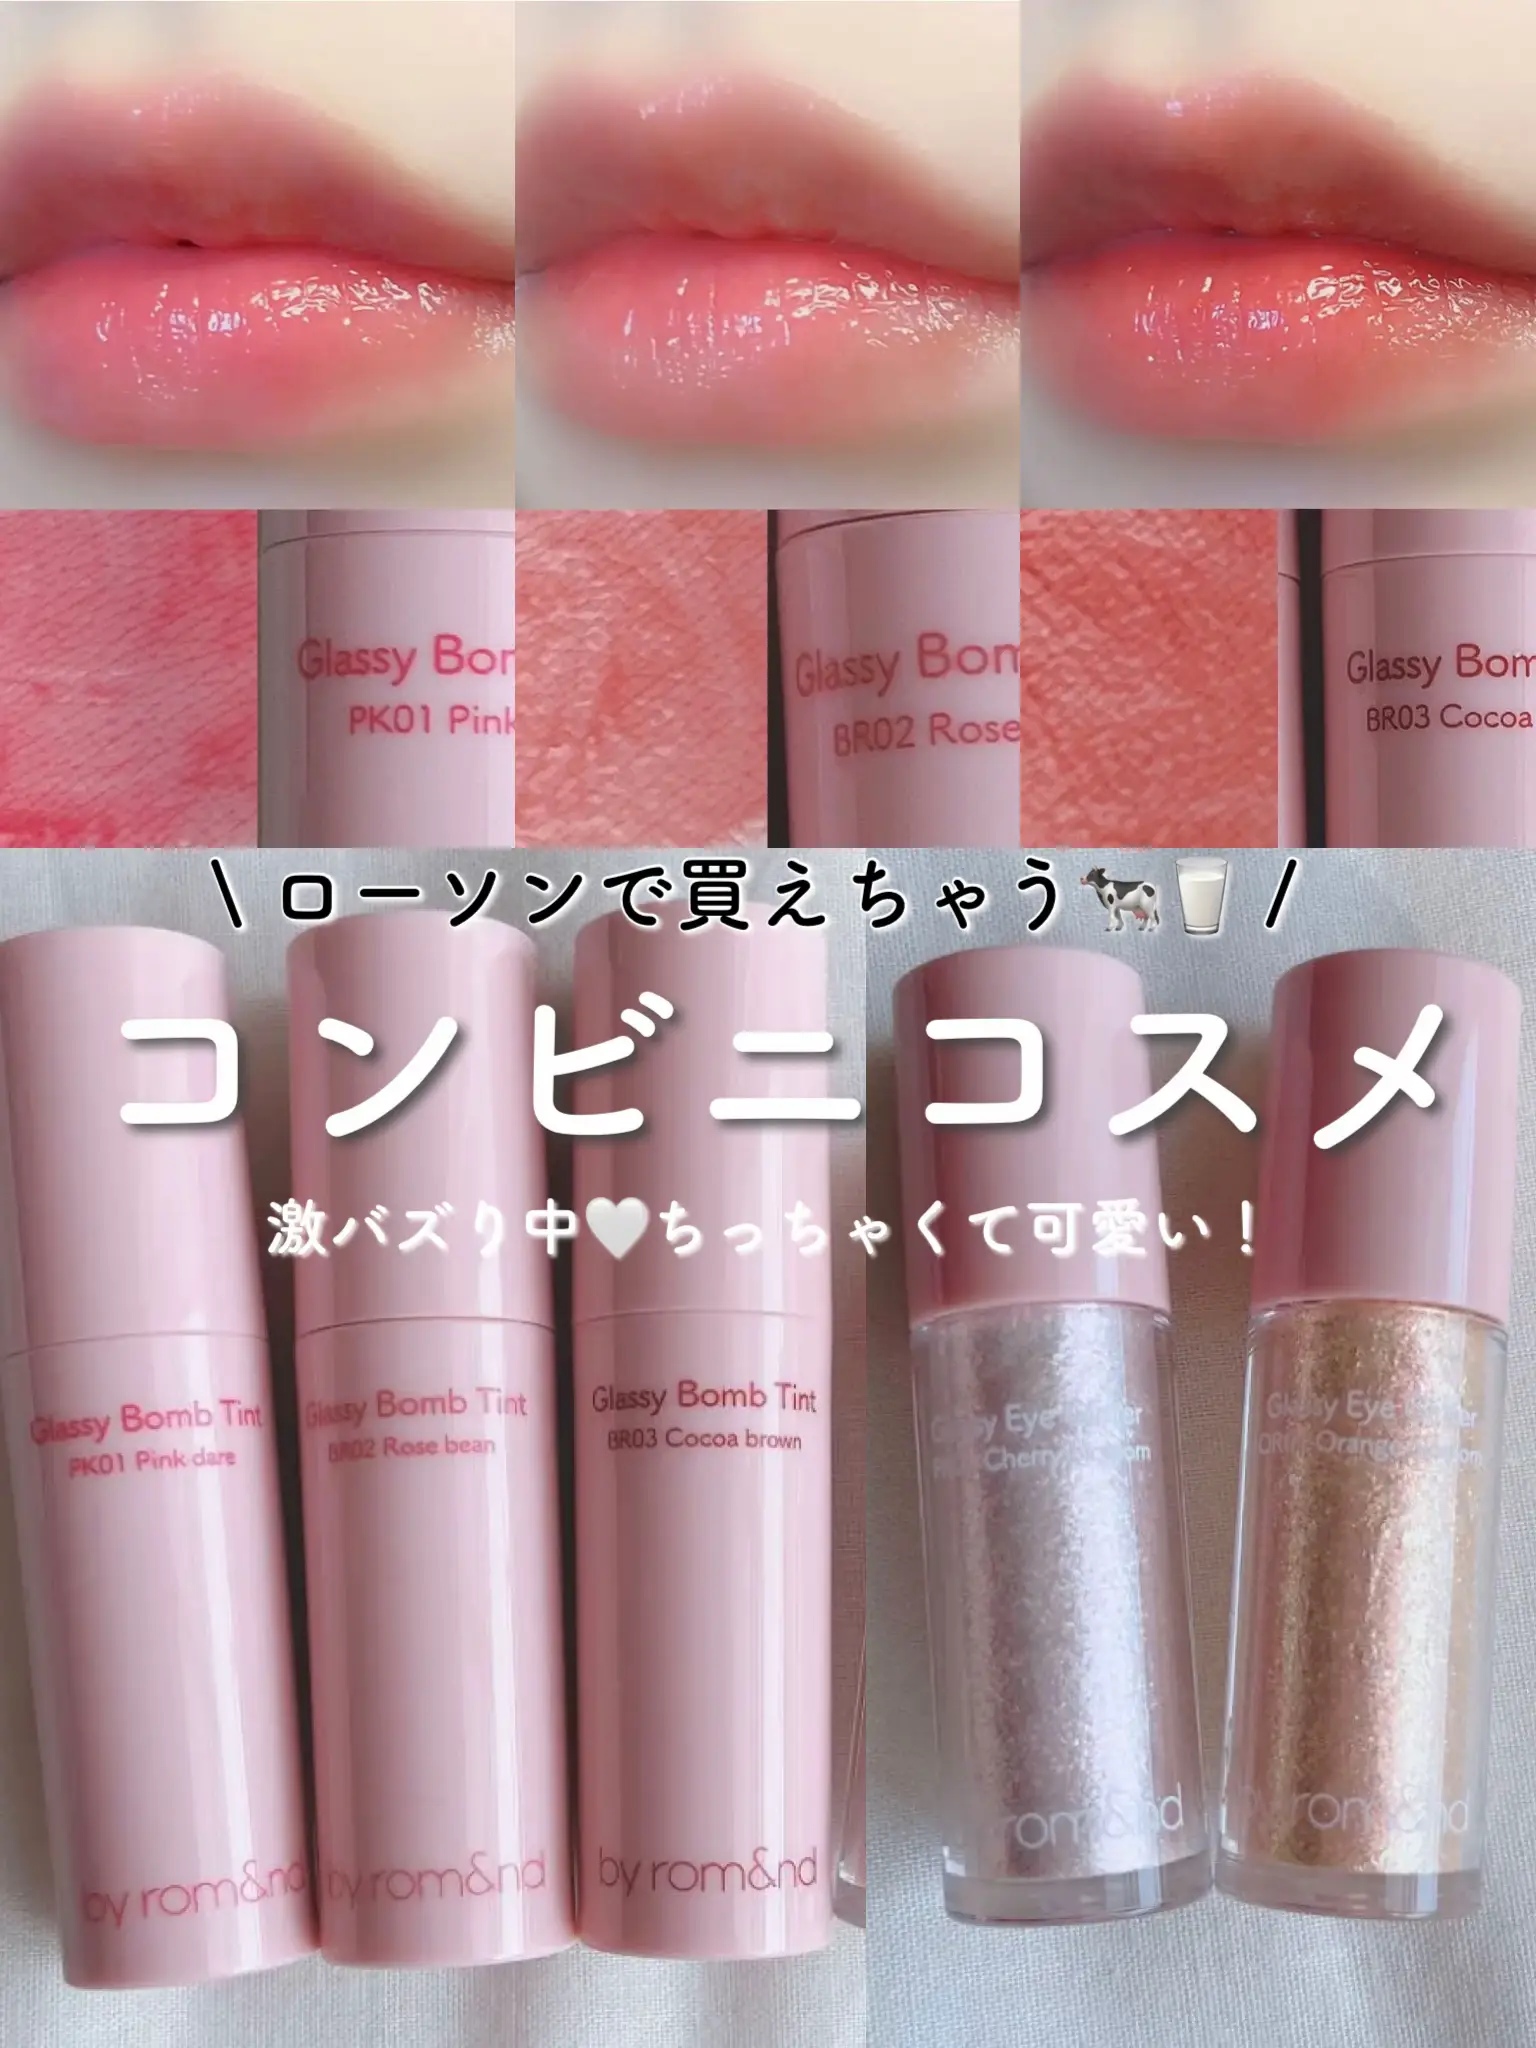 Rom&nd to launch Lawson-exclusive brand to capture Japan's makeup rebound